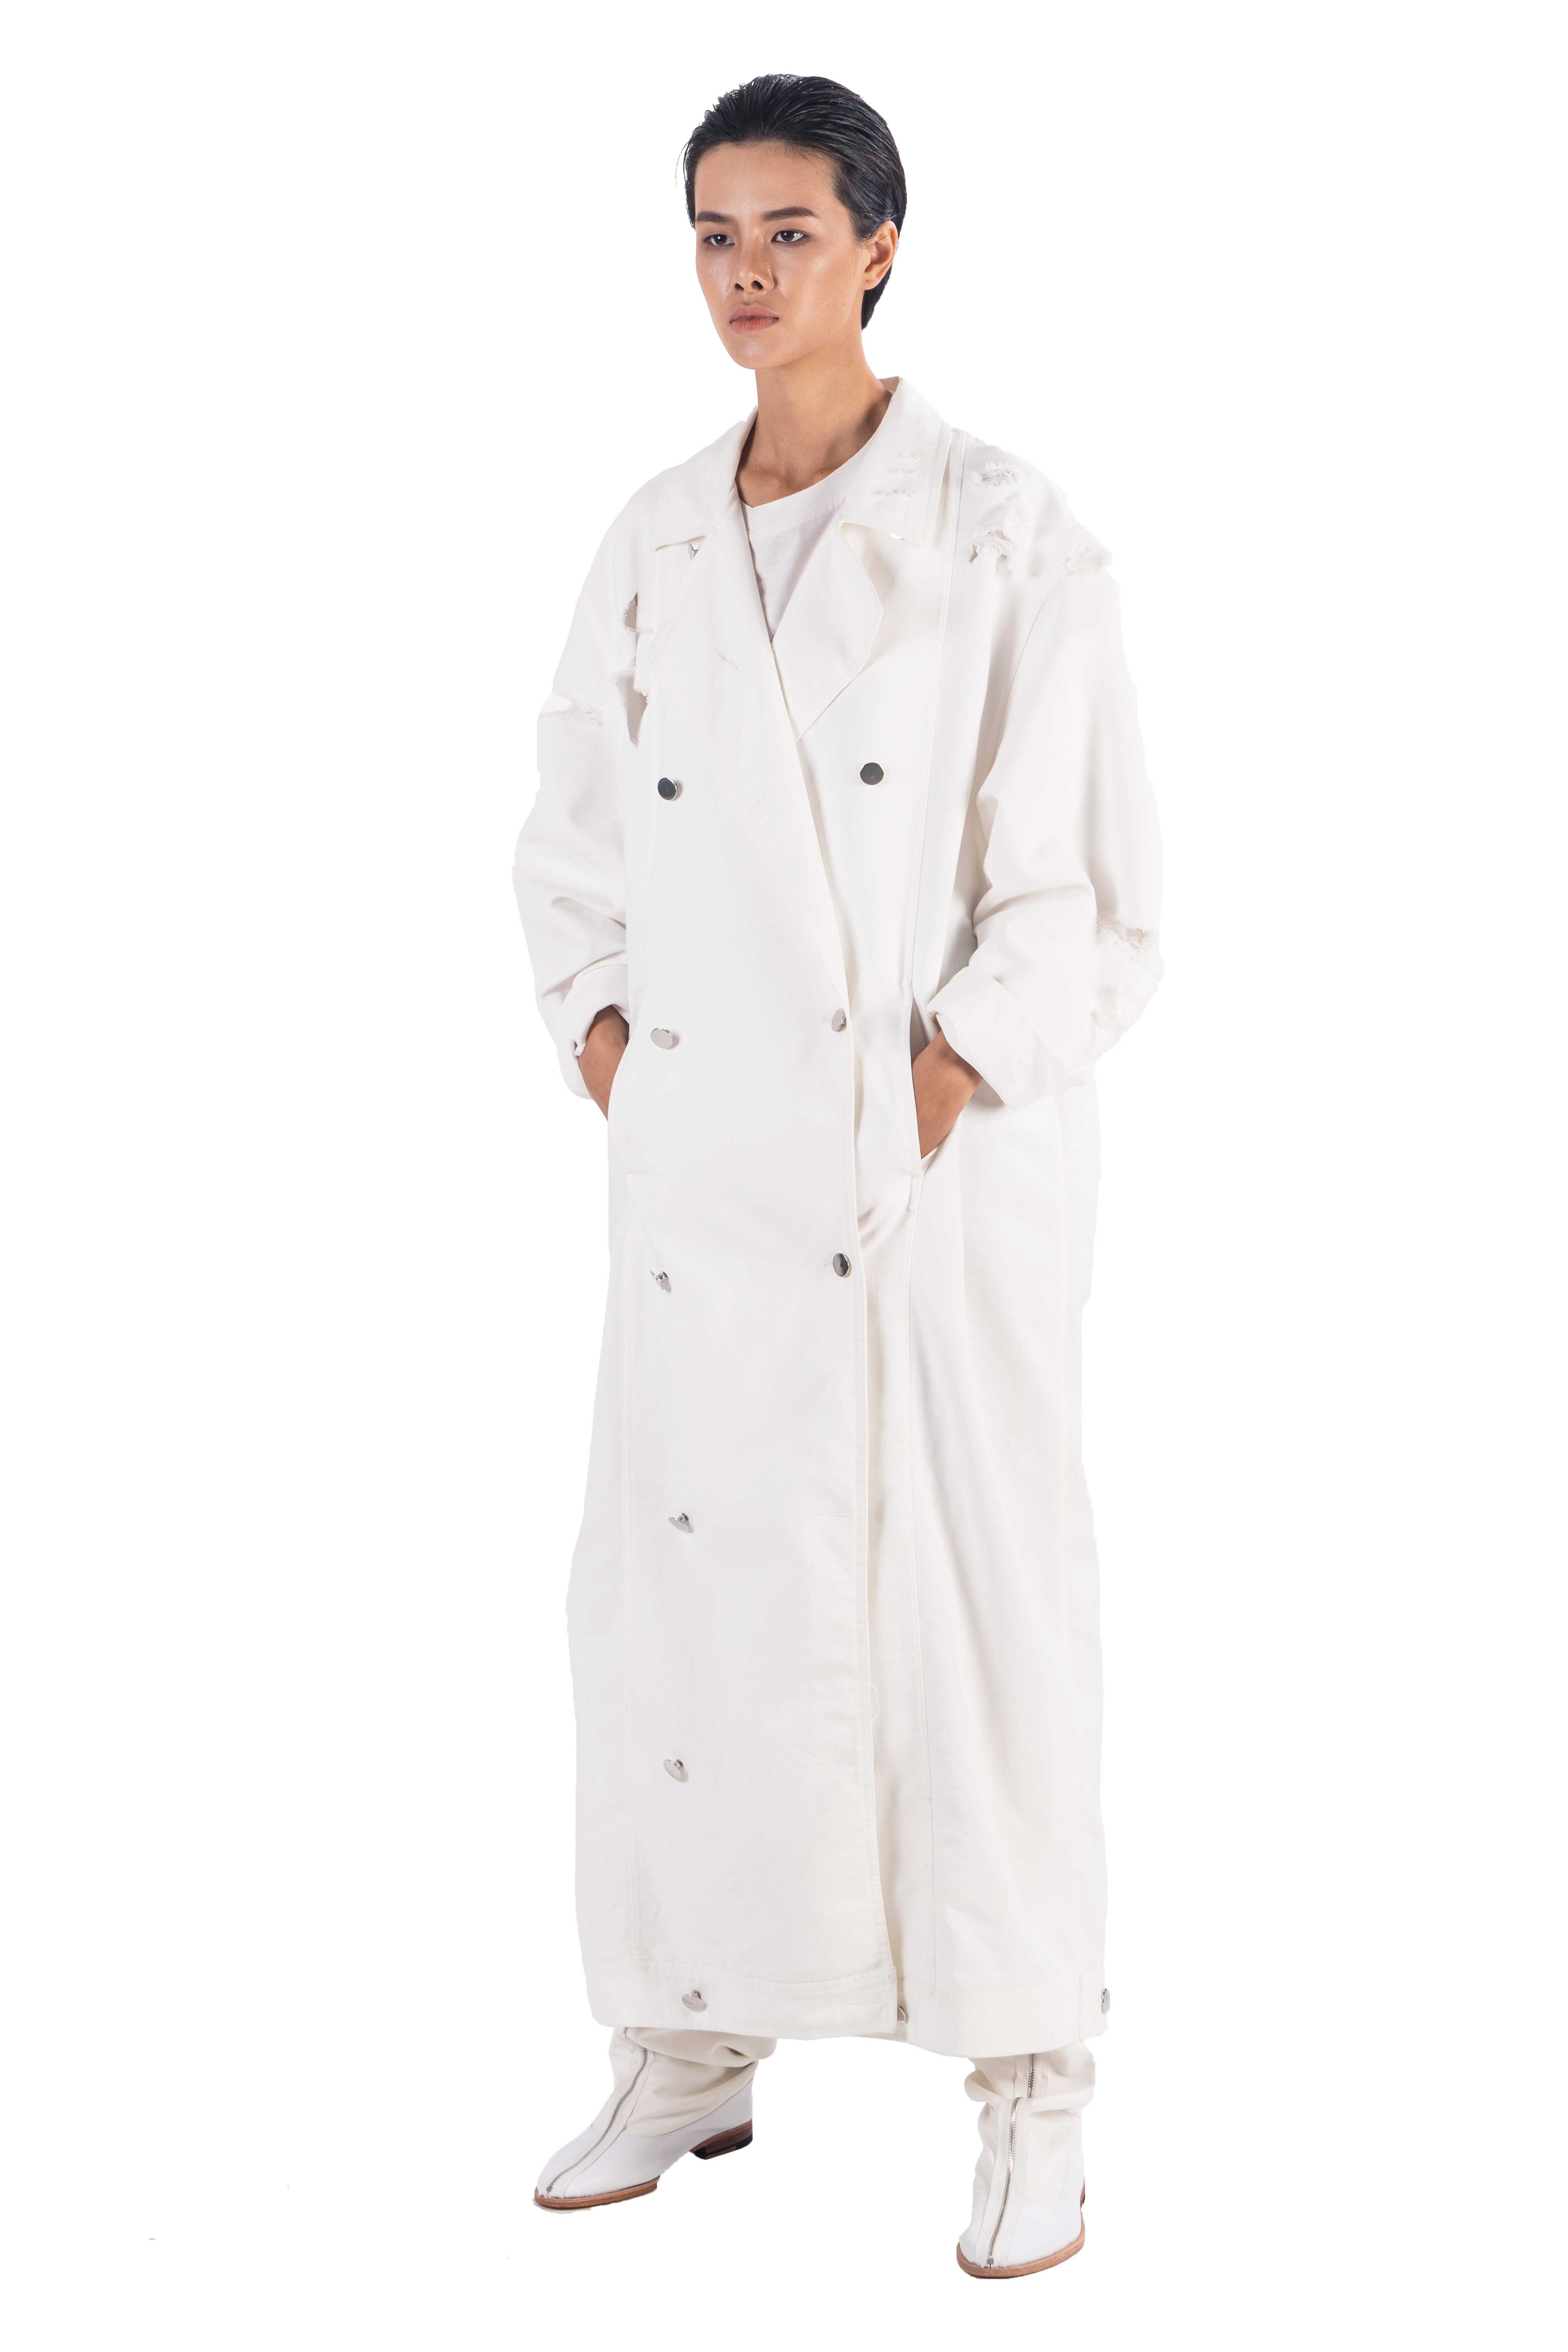 White  double breasted long heavy cotton coat with rips on shoulder and sleeves